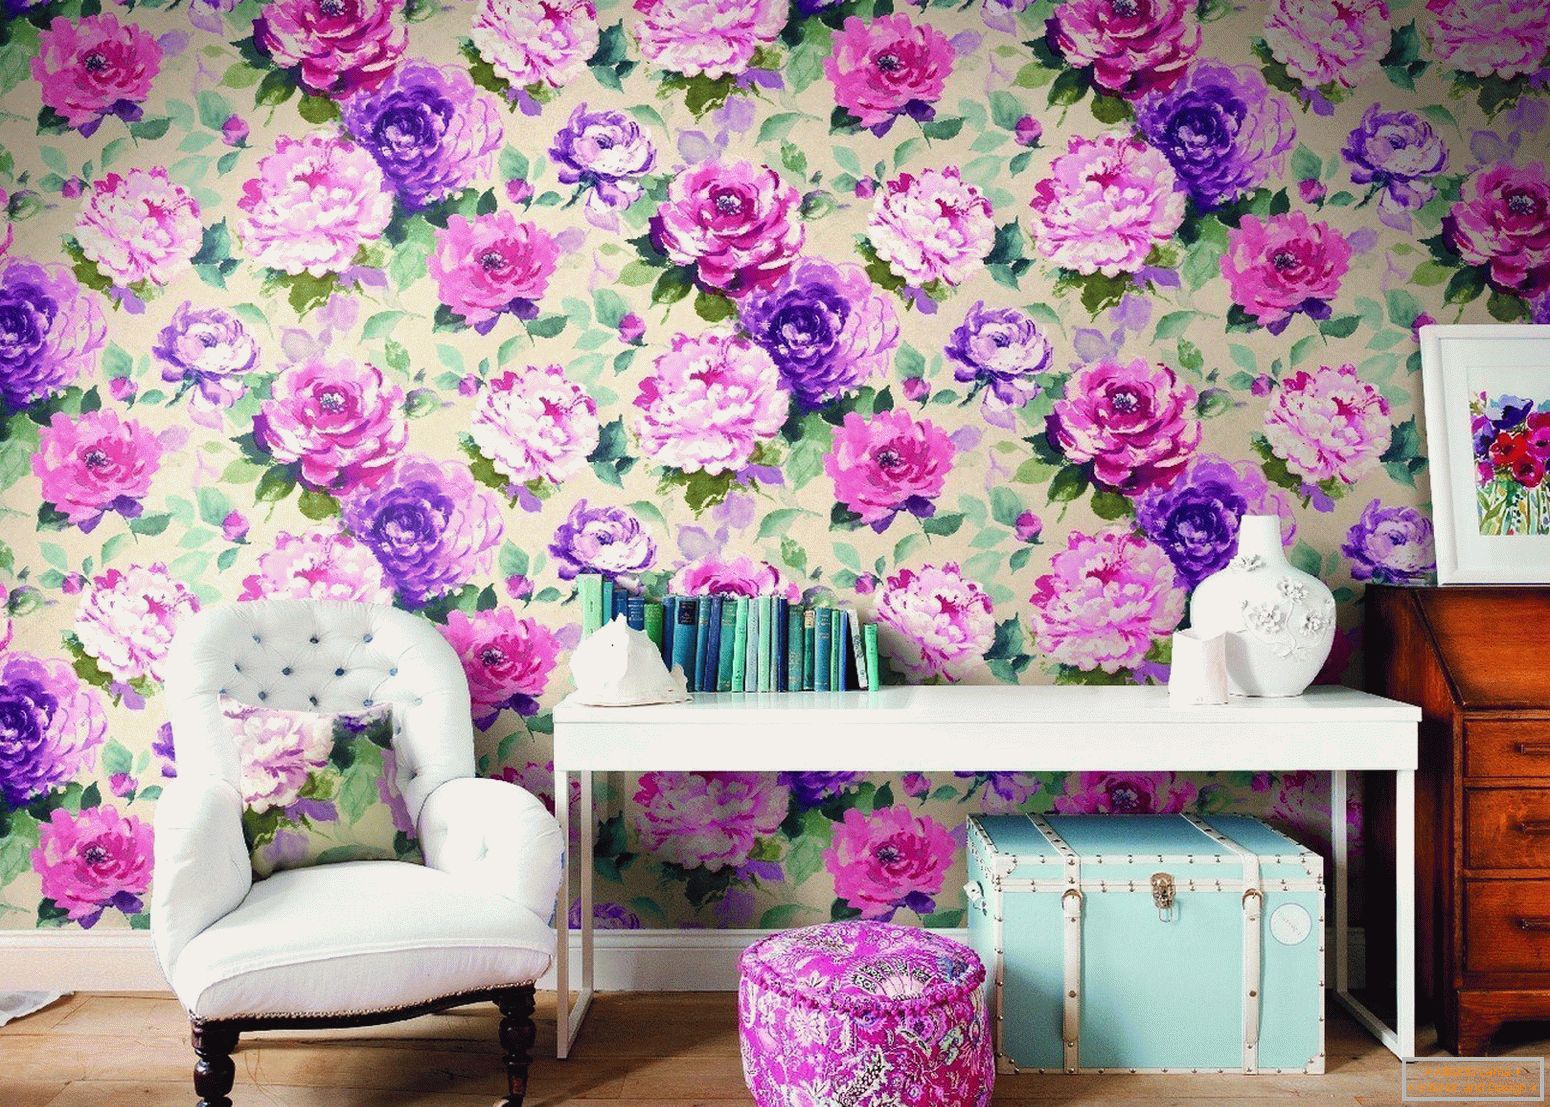 Wallpapers with flowers in the interior